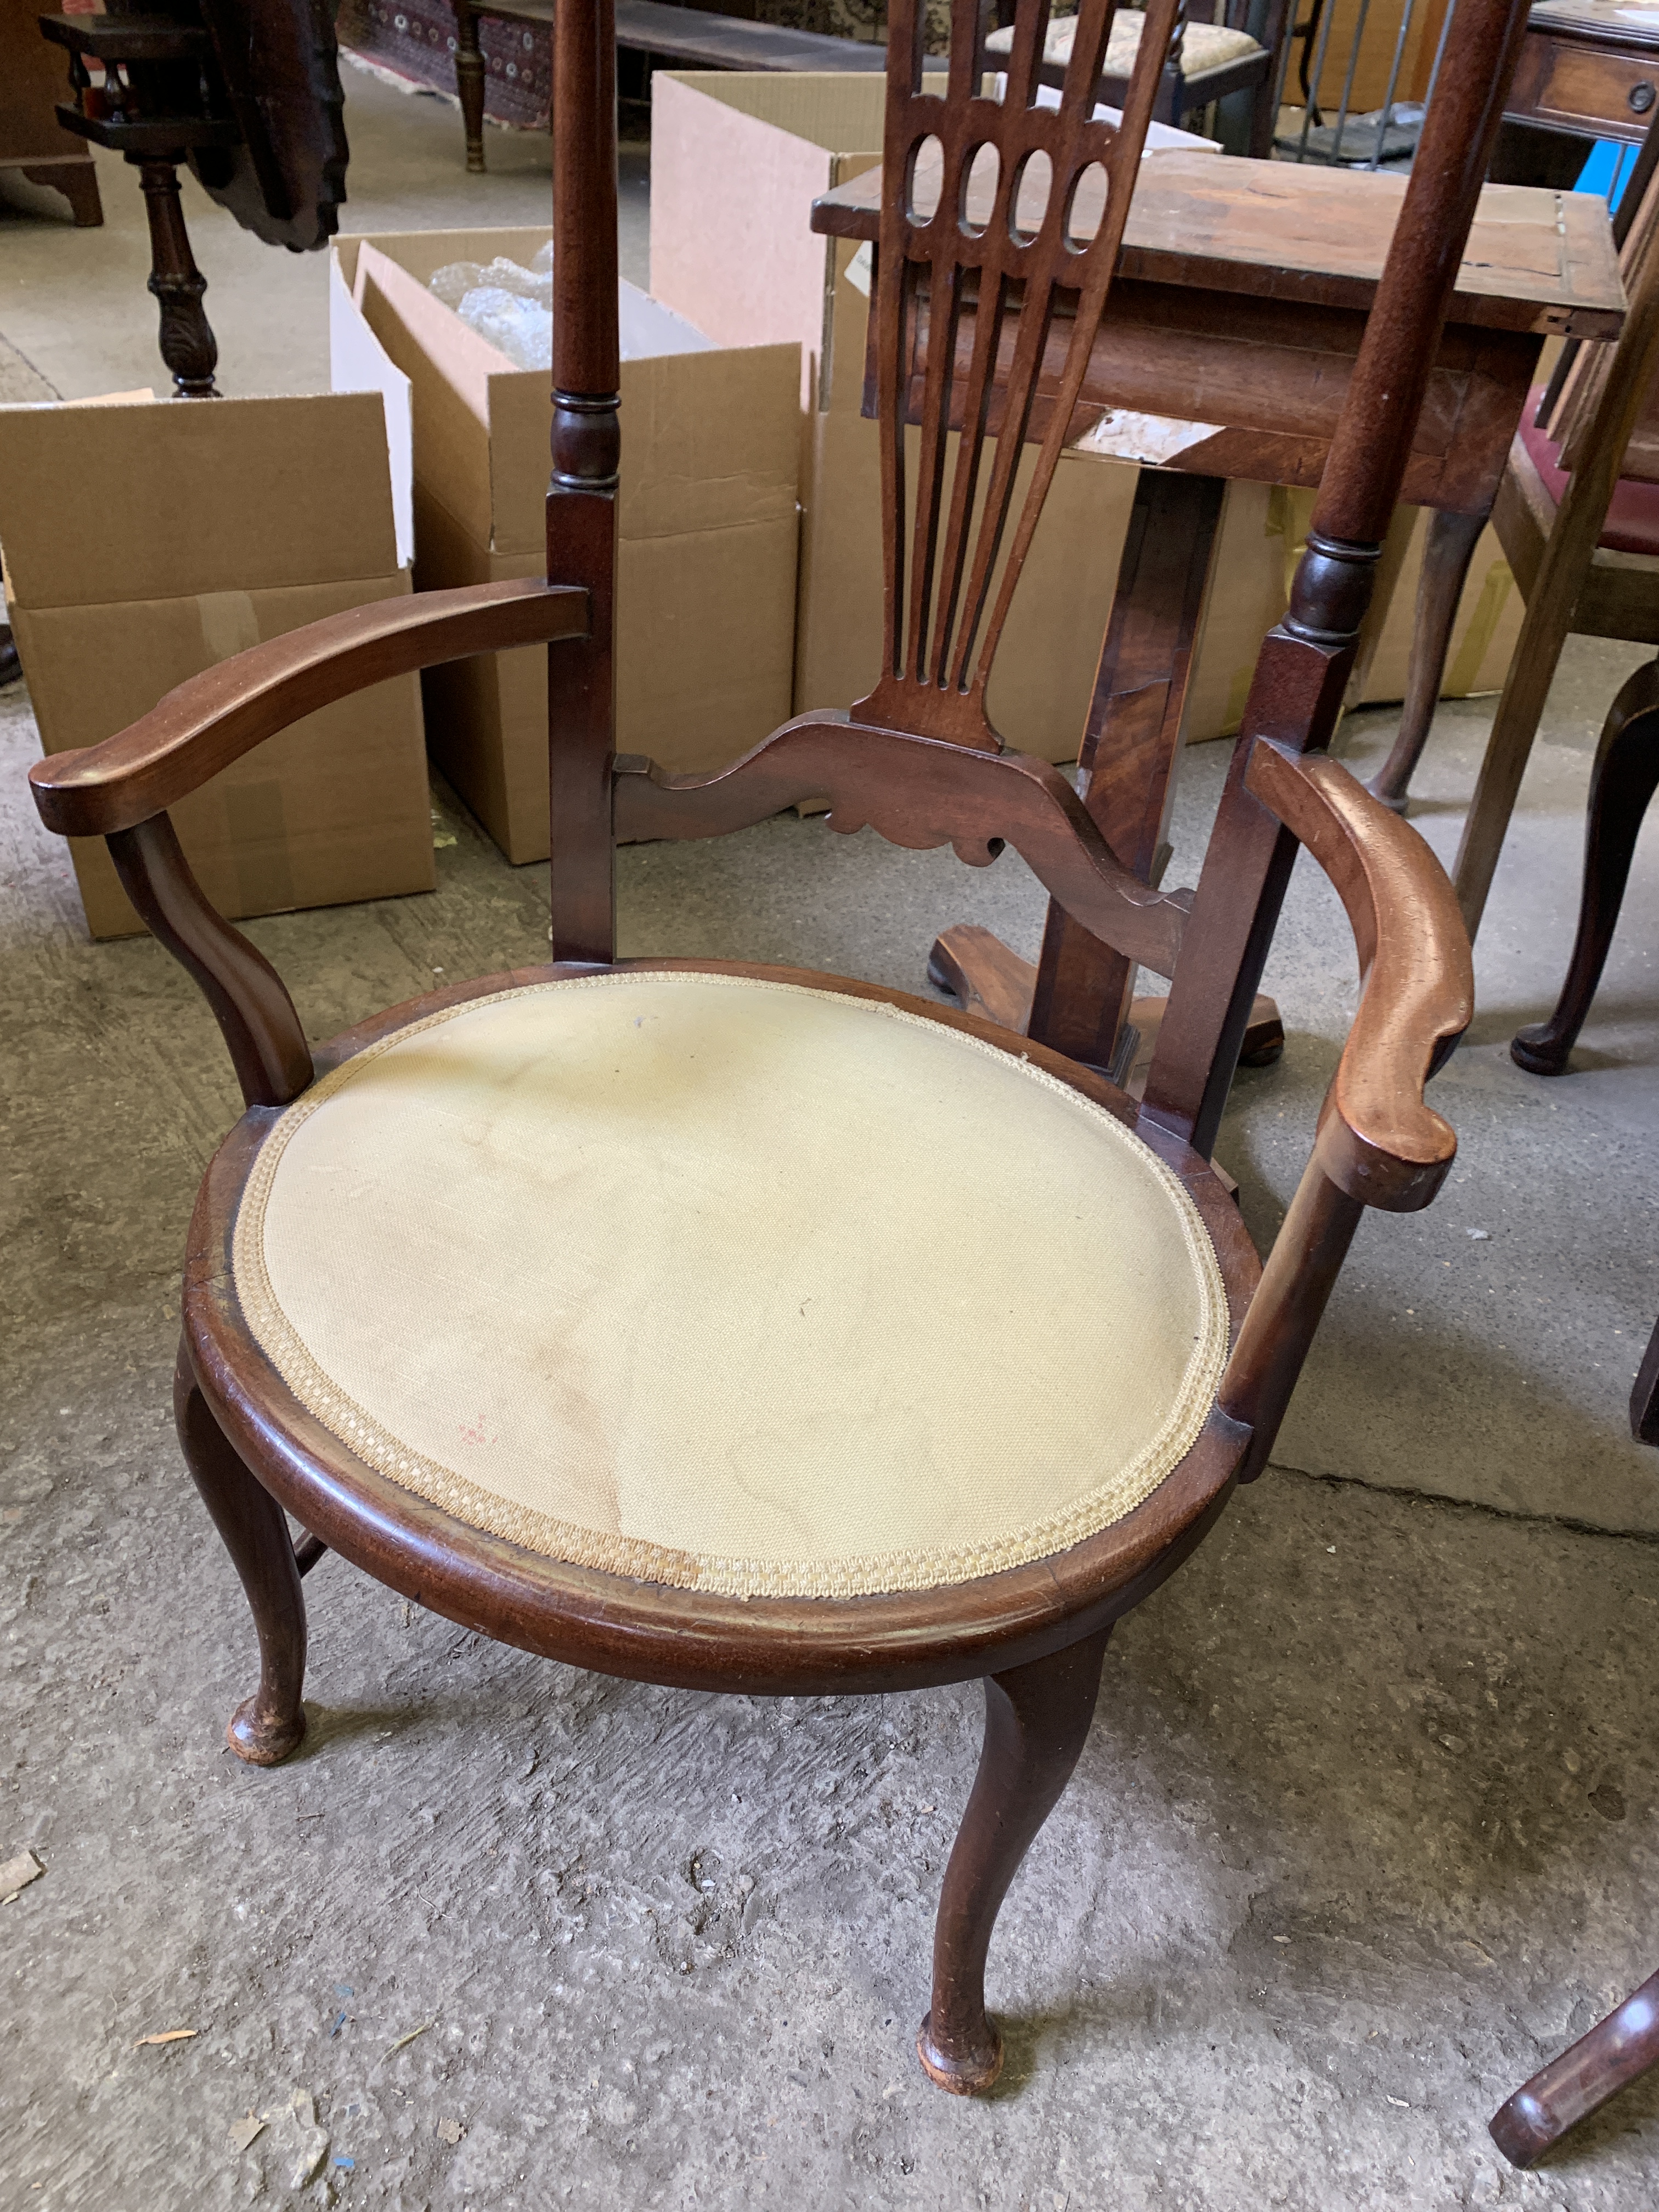 Mahogany framed high back low seat open elbow chair; together with a mahogany chair